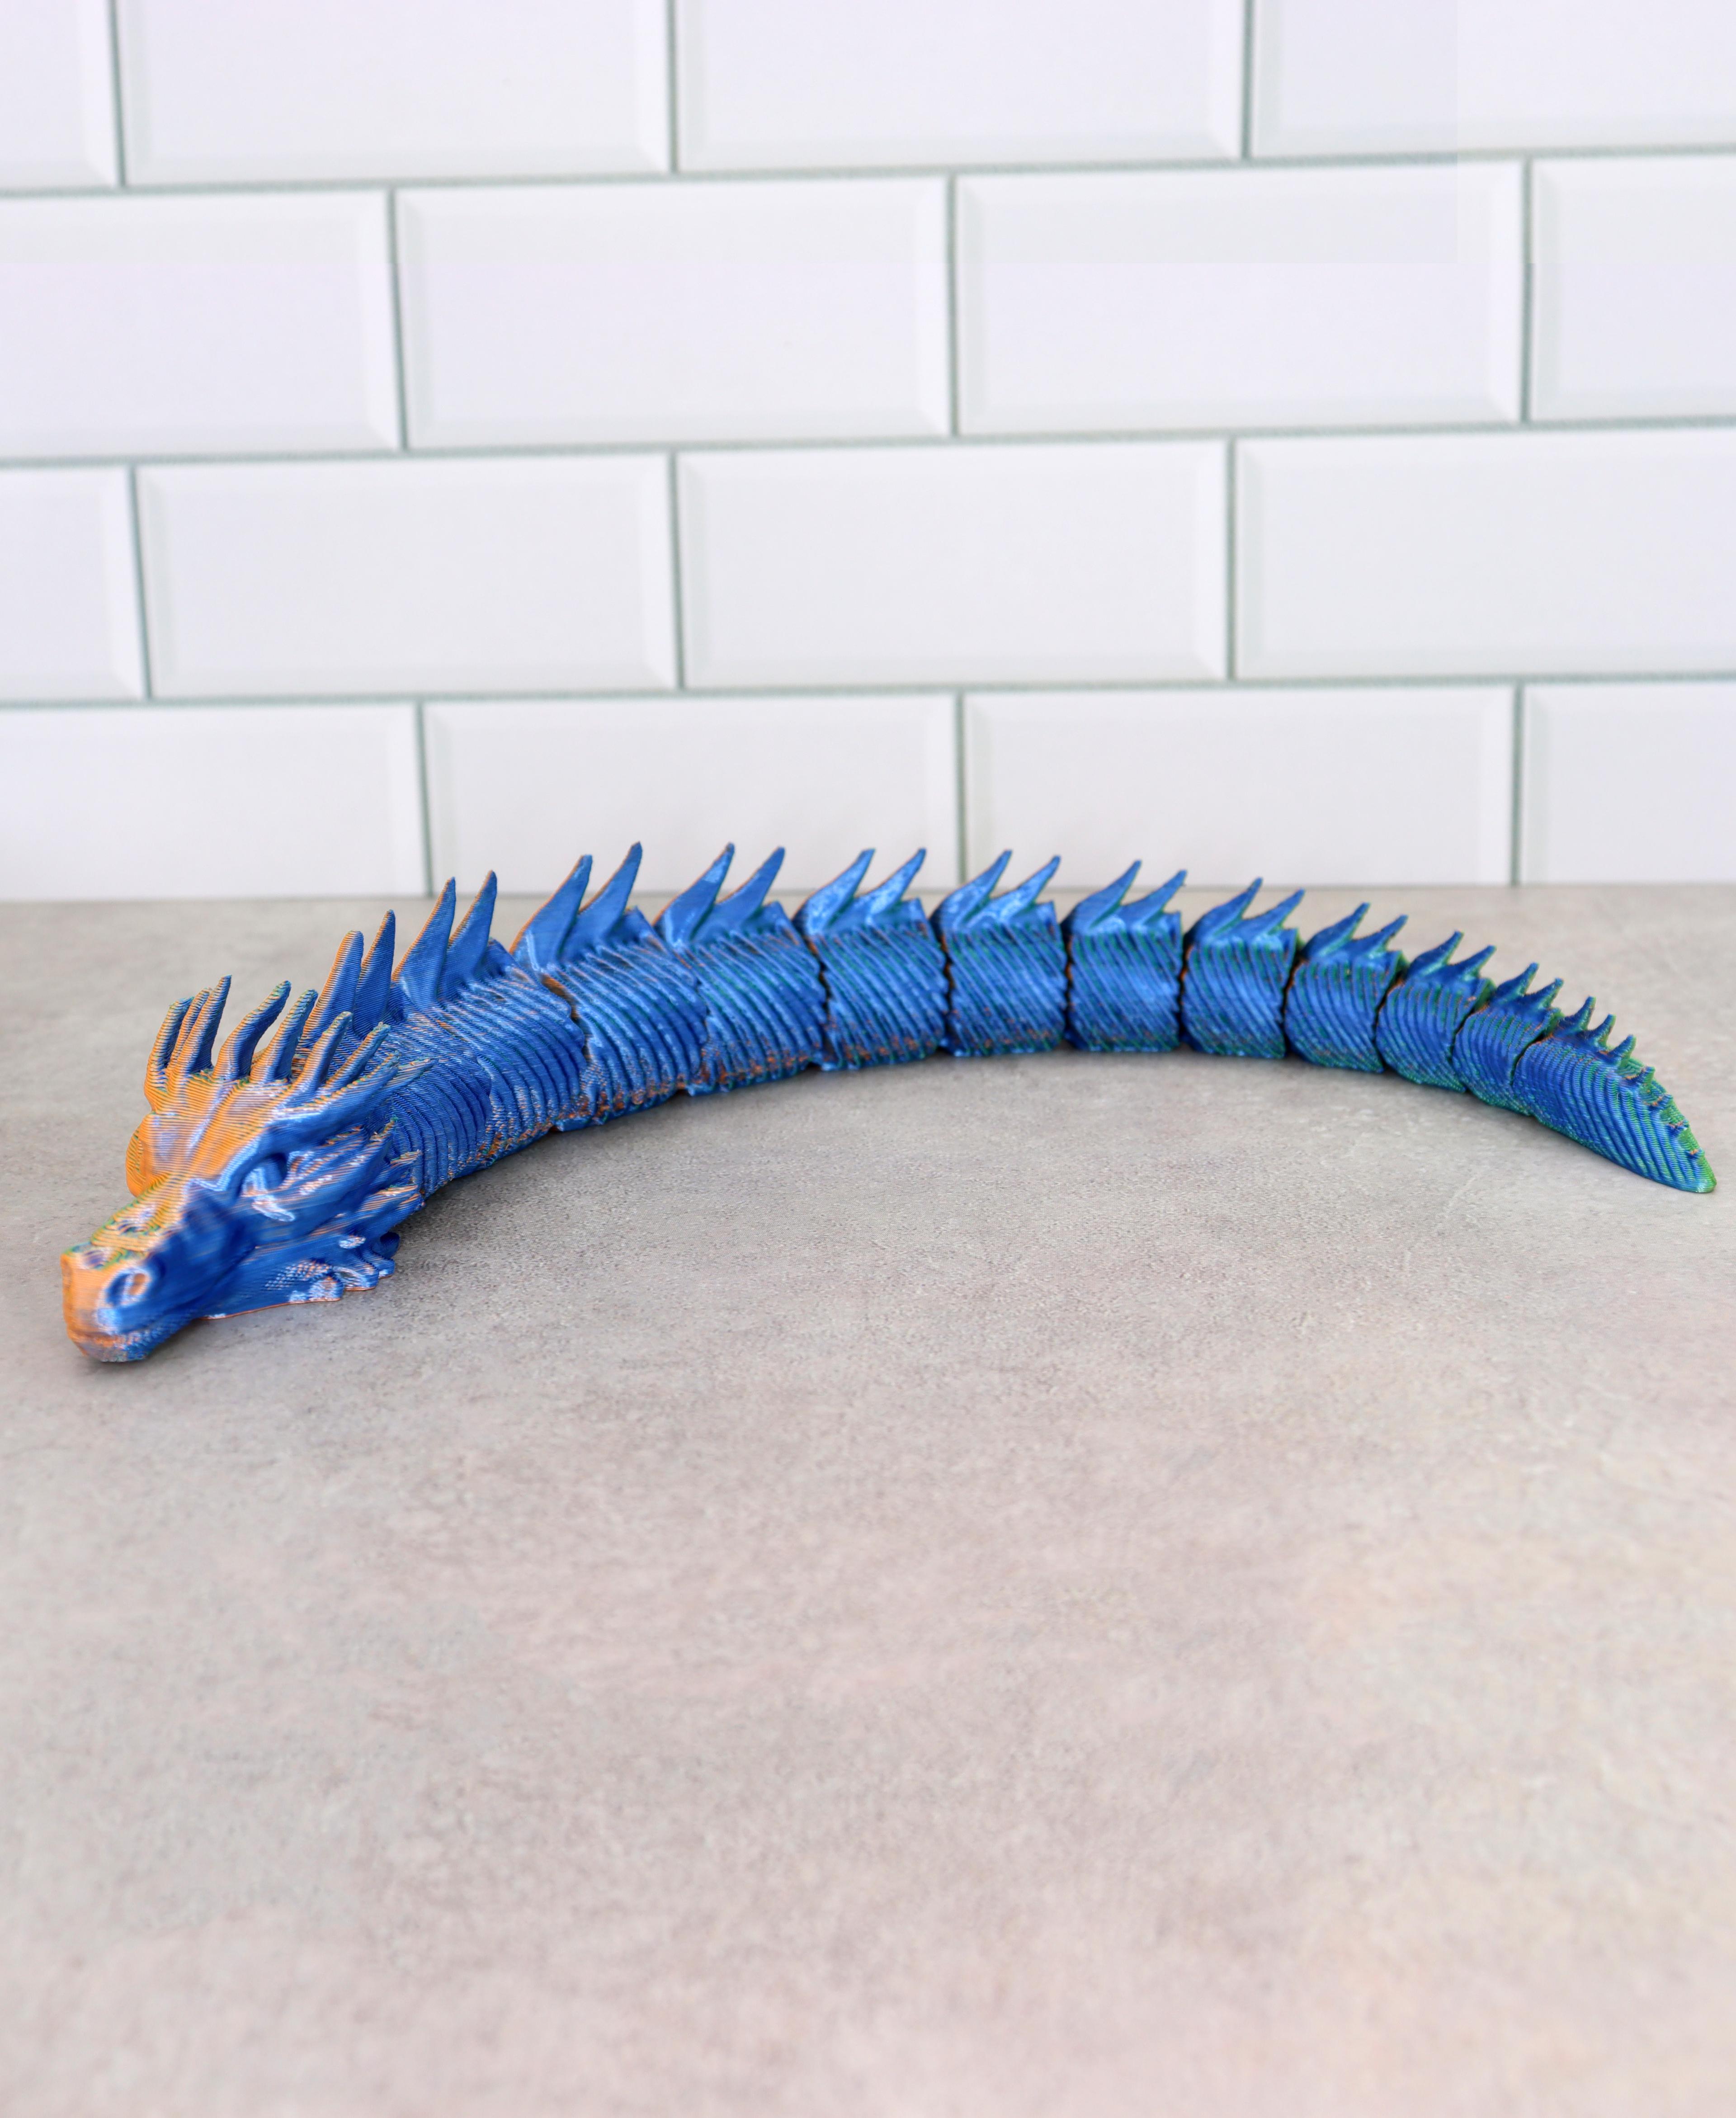 Rattle skin dragon articulated 3d model